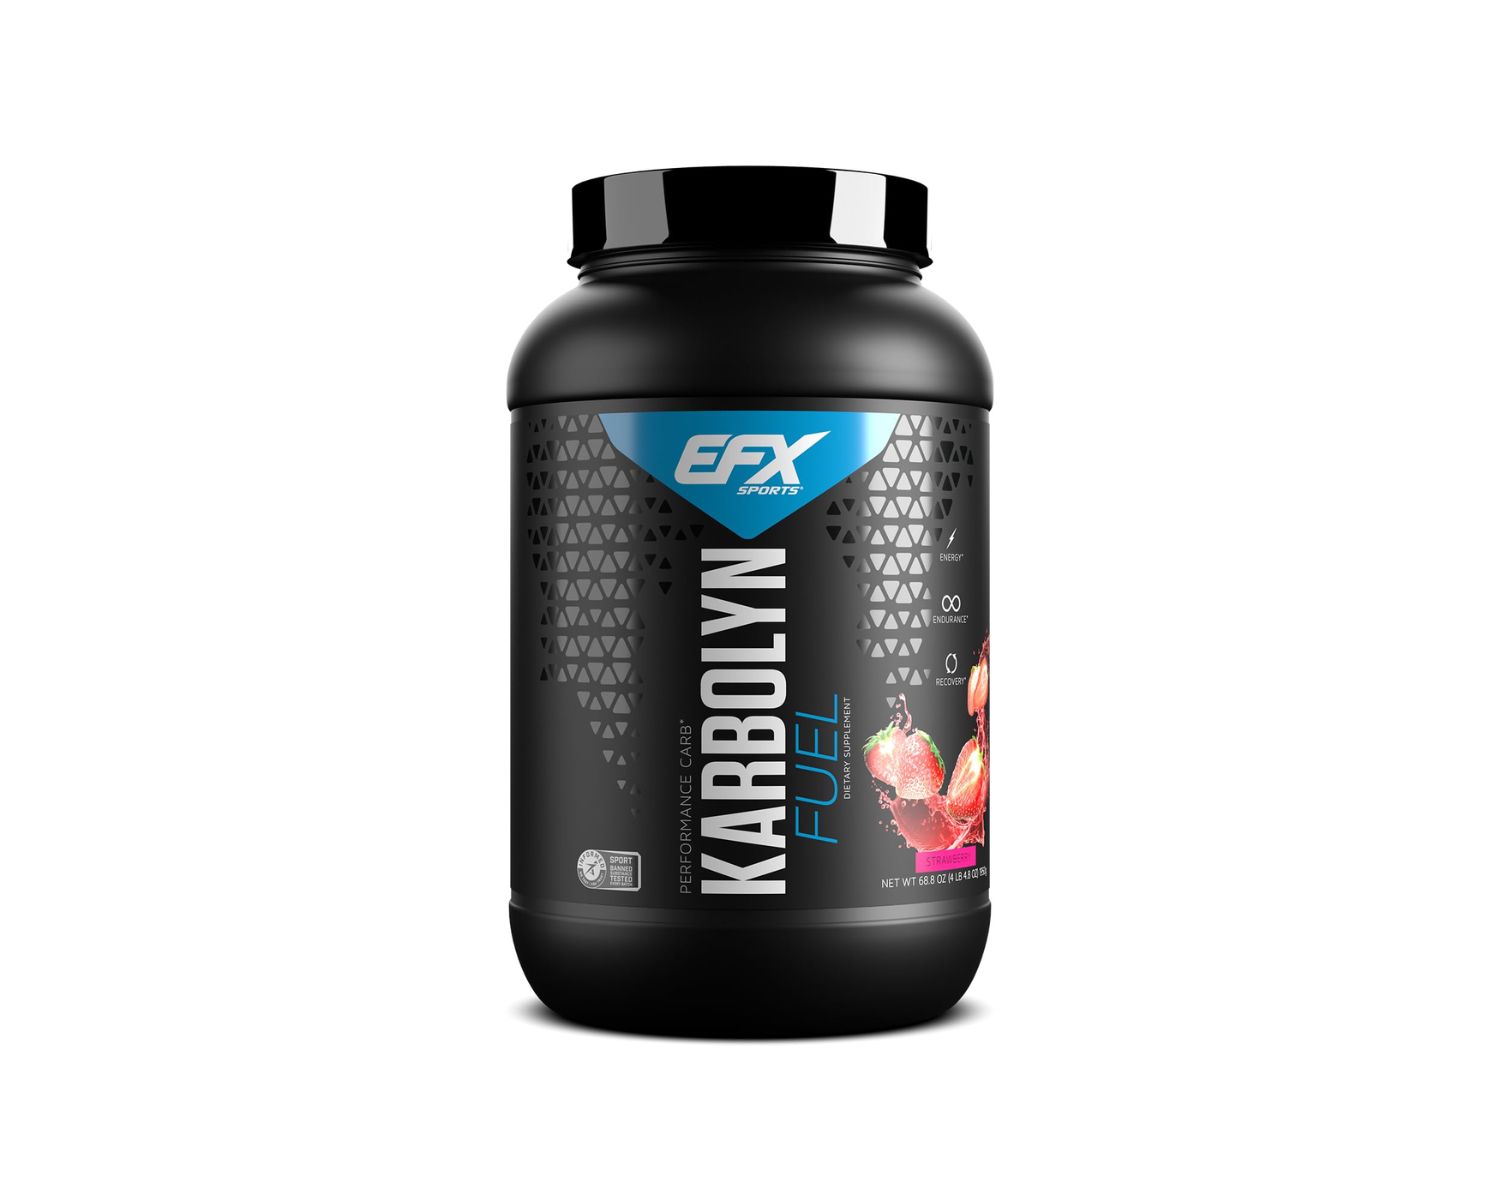 18-karbolyn-nutrition-facts